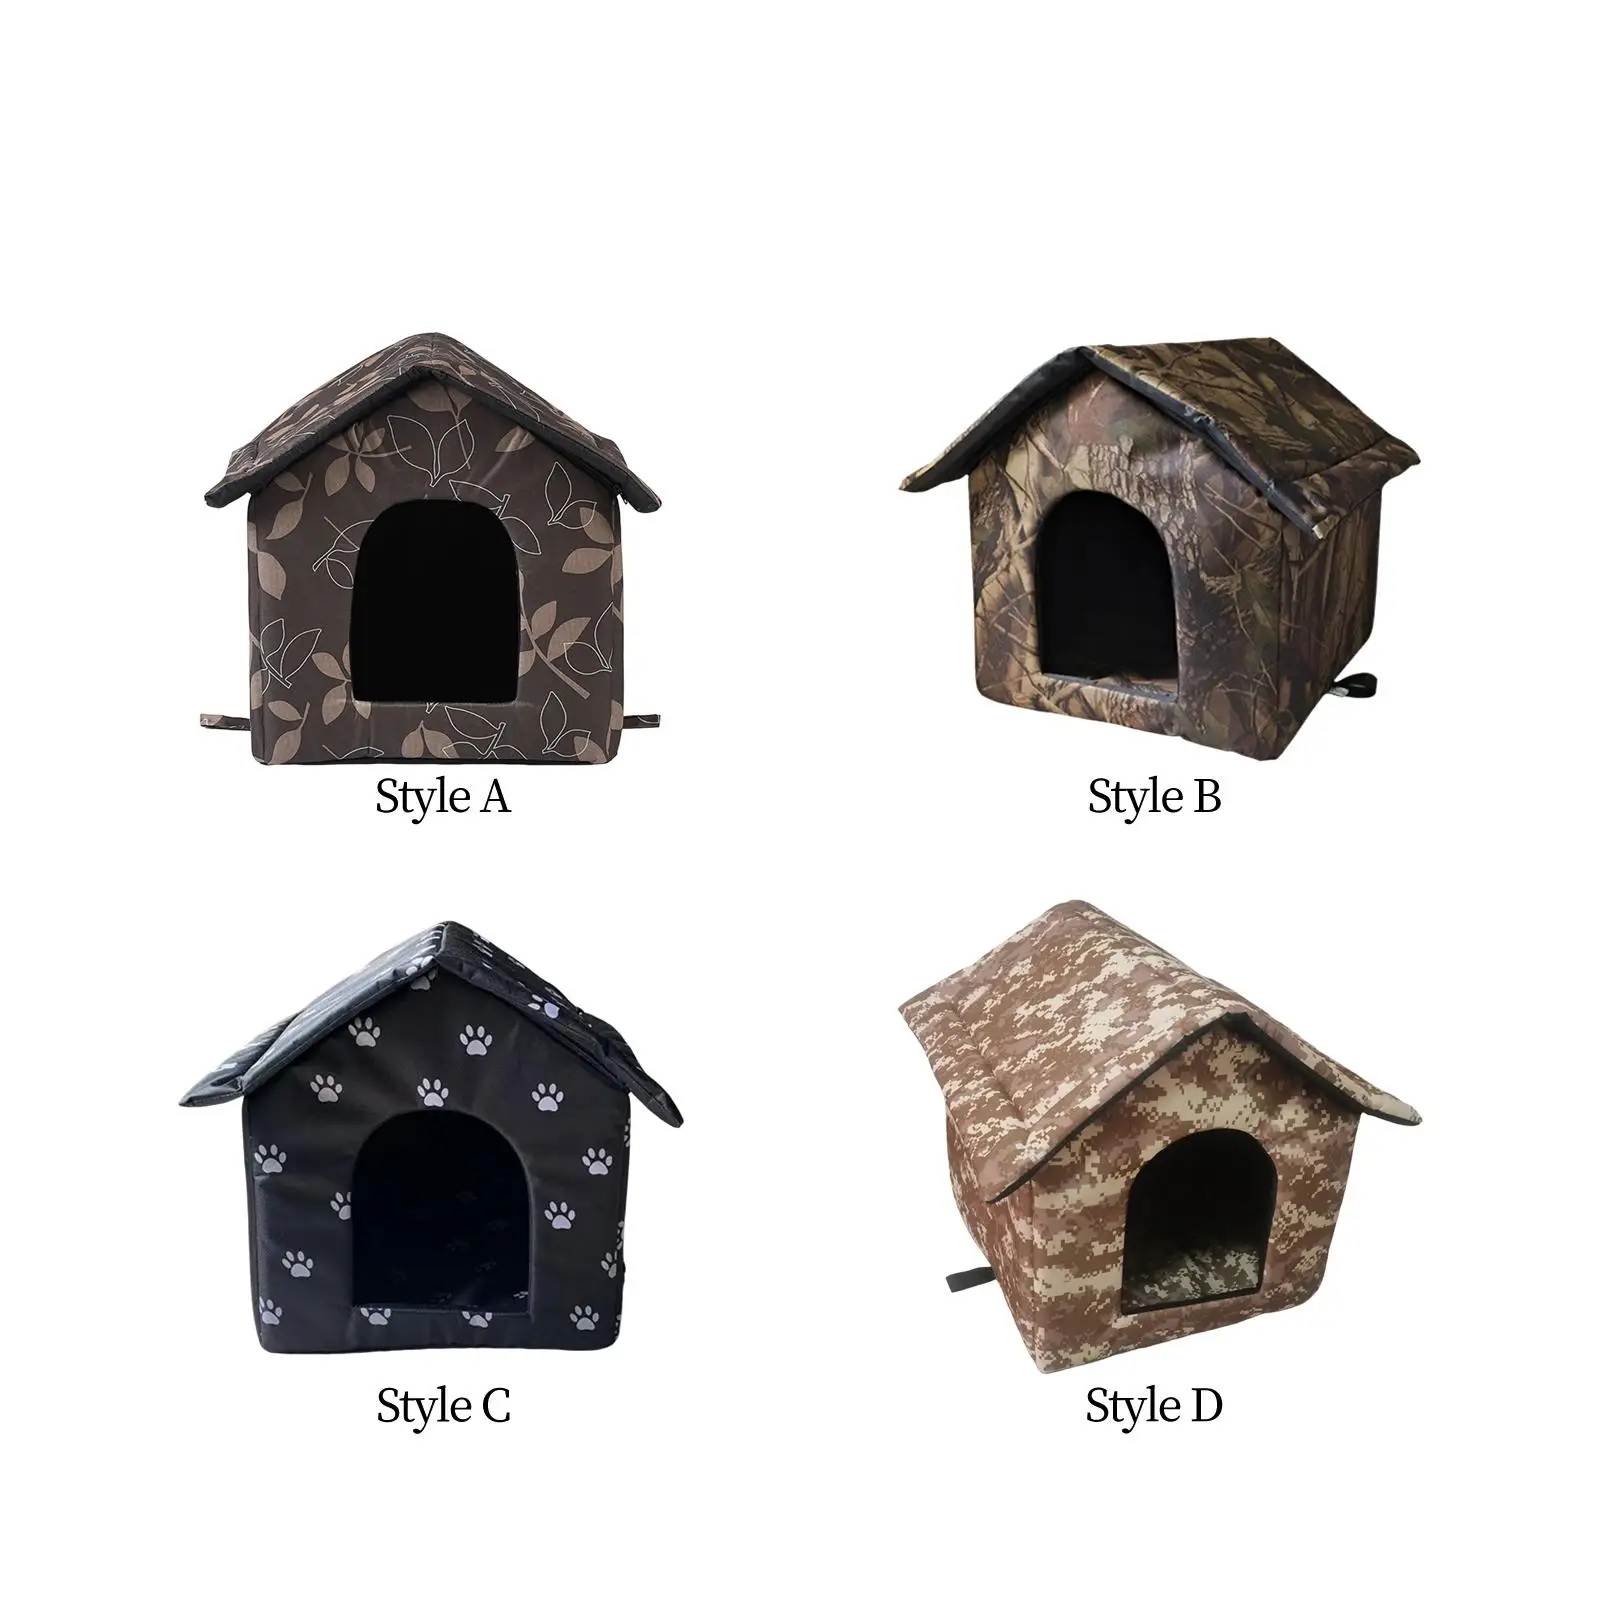 Oxford Cloth  House Stray Cats Shelter top zippered Connection Method for Garages, Porches, Barns, Balconies, Corridors